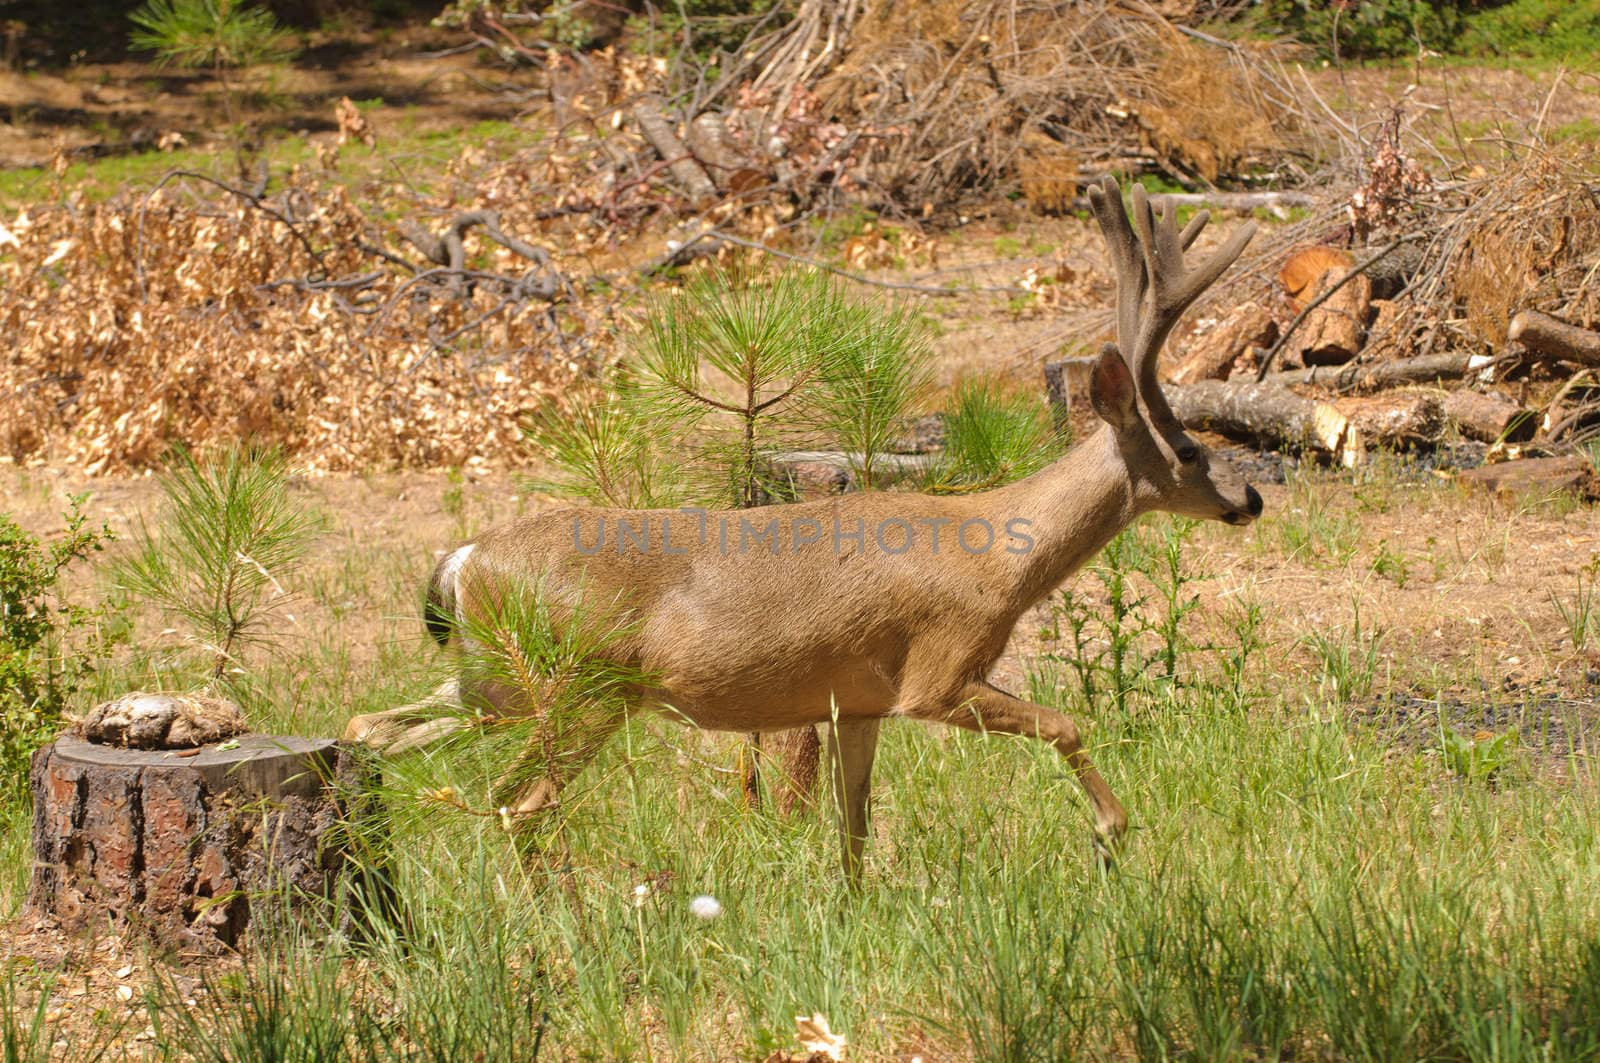 Colombian Black-tailed buck tip-toeing through some logging area